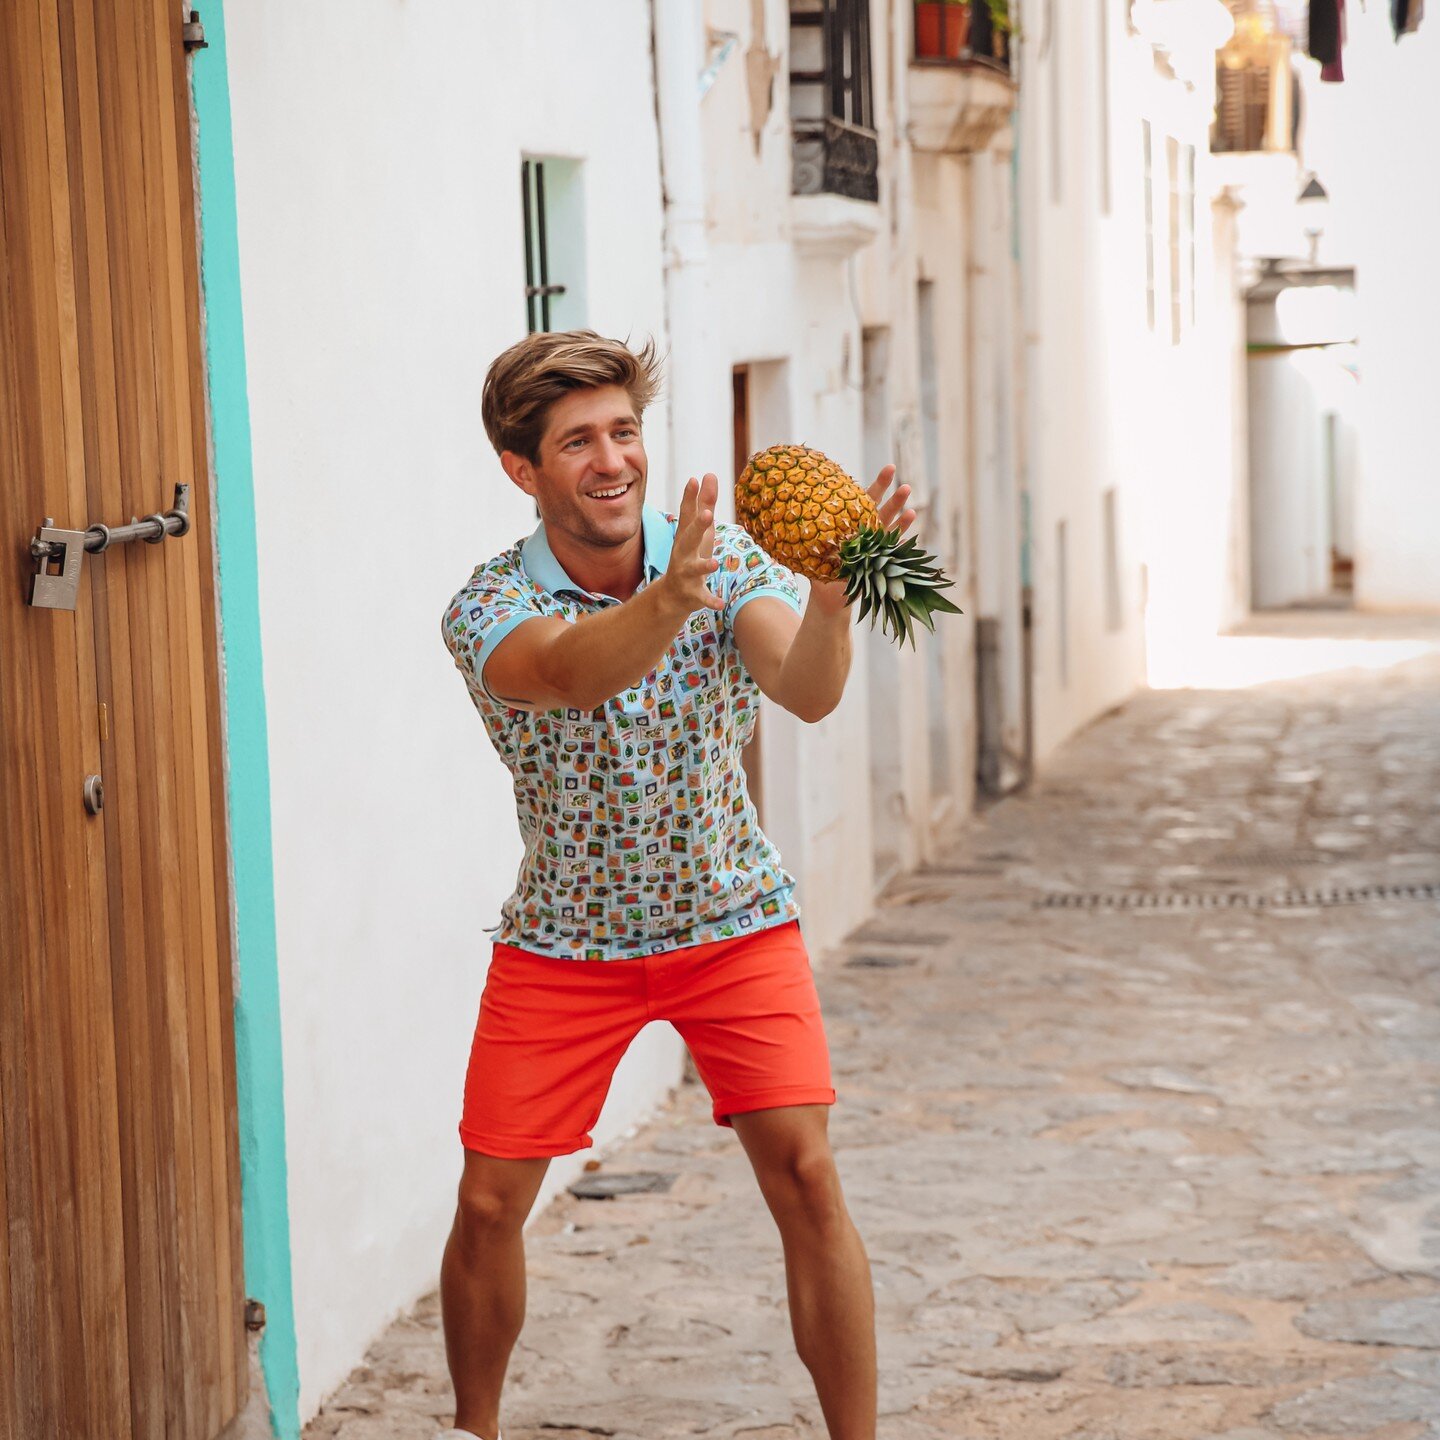 New Summer Stock from Fish Named Fred is here! Inspired by the lovely colours and patterns of Brazil. Come visit us in-store or on our website: https://www.harrisonsmenswear.com.au/